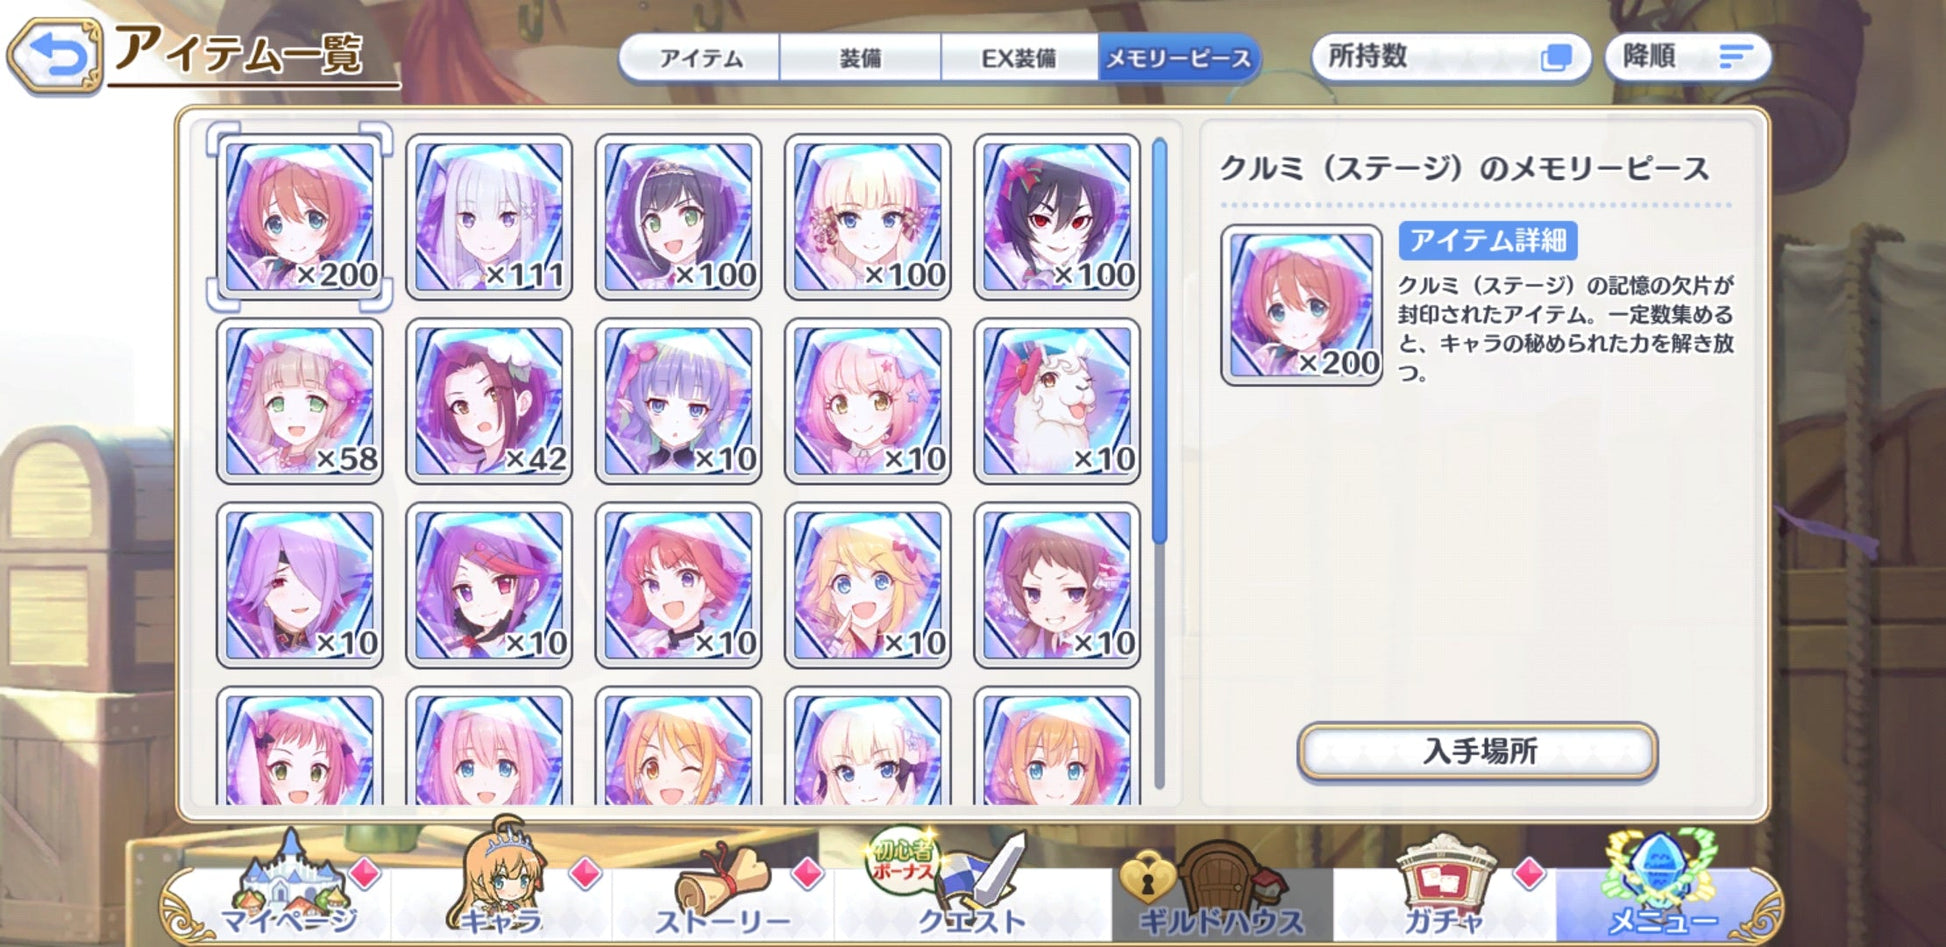 [JP][INSTANT] Priconne 30x3* +200k Jewels 6x3* tickets Starter Account Princess Connect Re:Dive-Mobile Games Starter